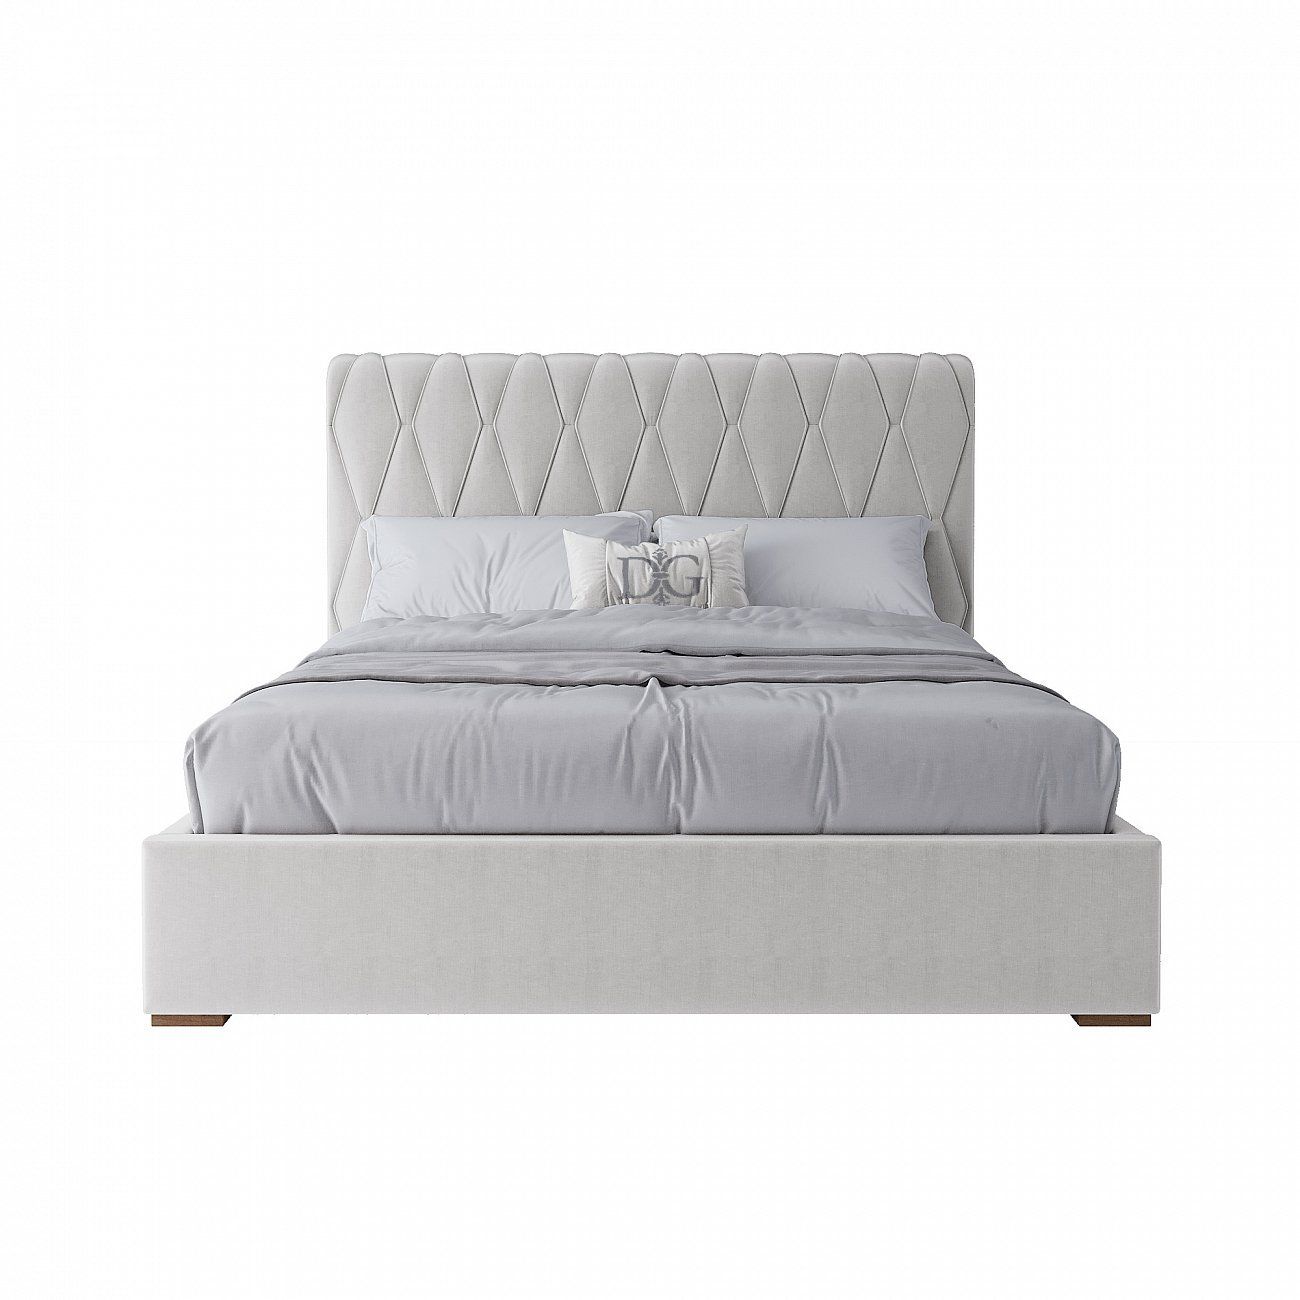 Double bed 160x200 white Bluemoon